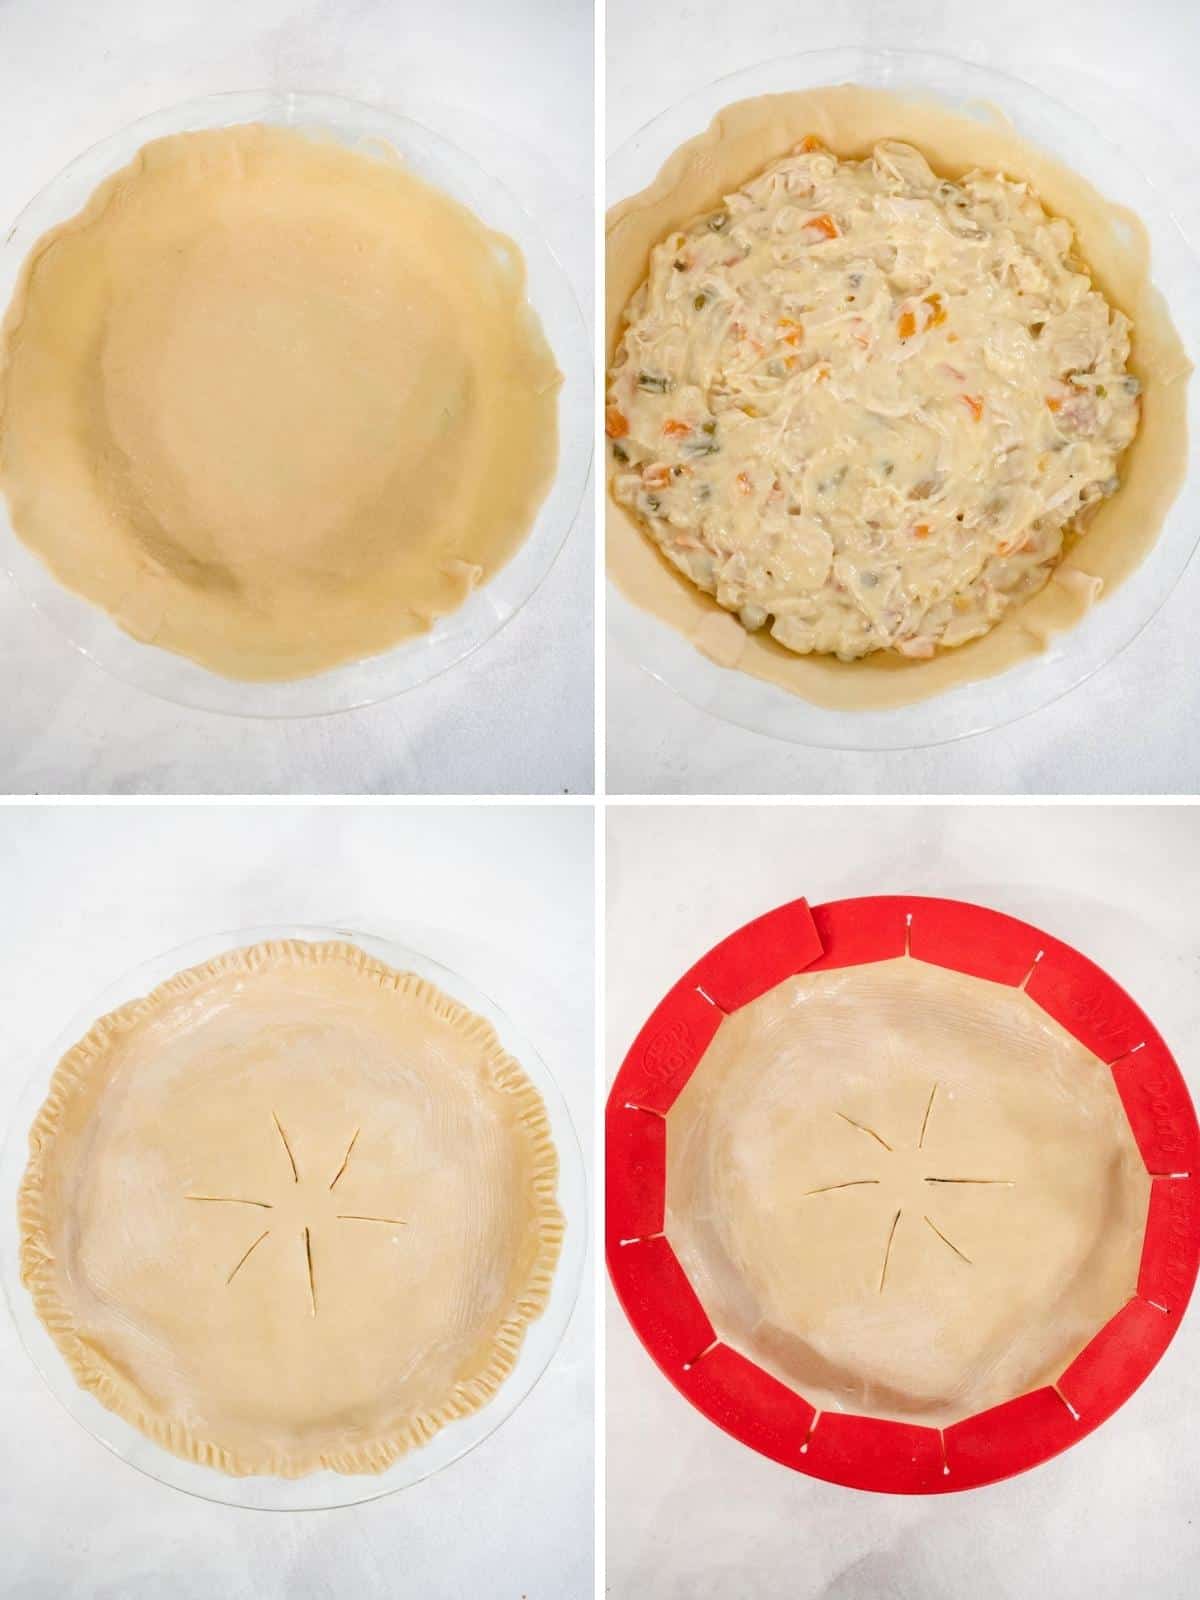 Images show steps to fill pie crust and top with second crust and the add a pie shield for baking.